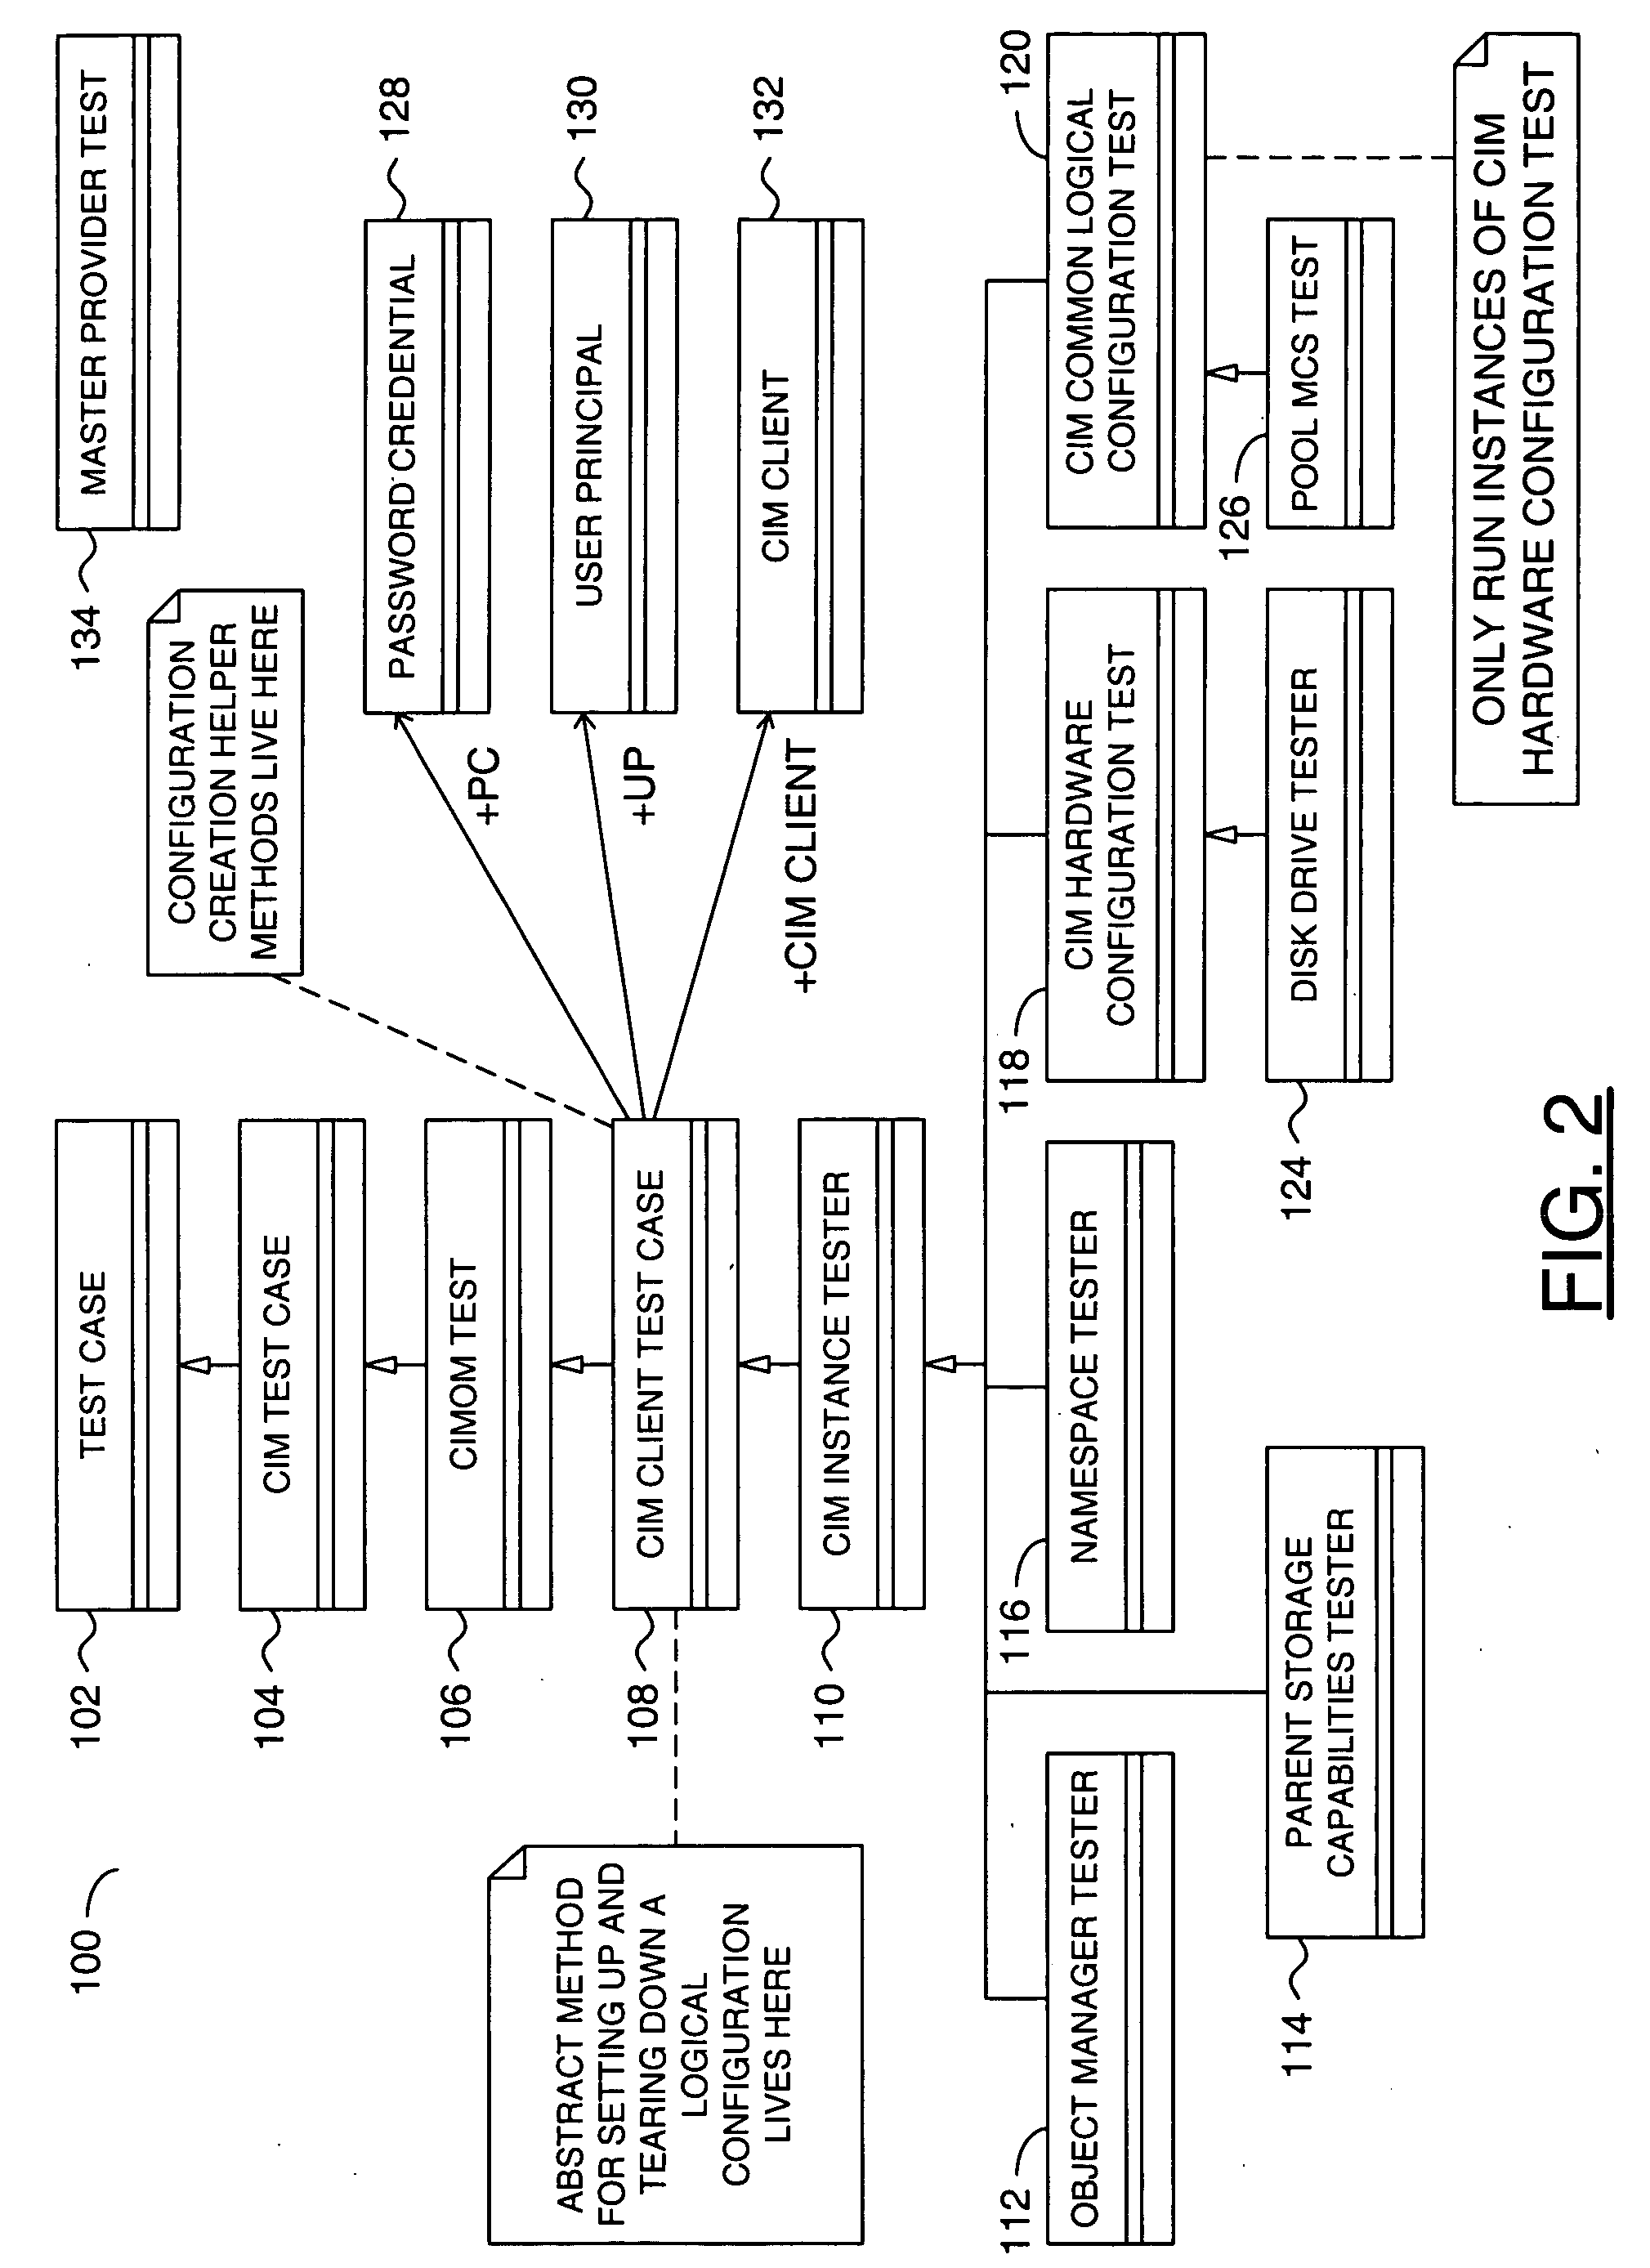 System and/or method for implementing efficient techniques for testing common information model providers